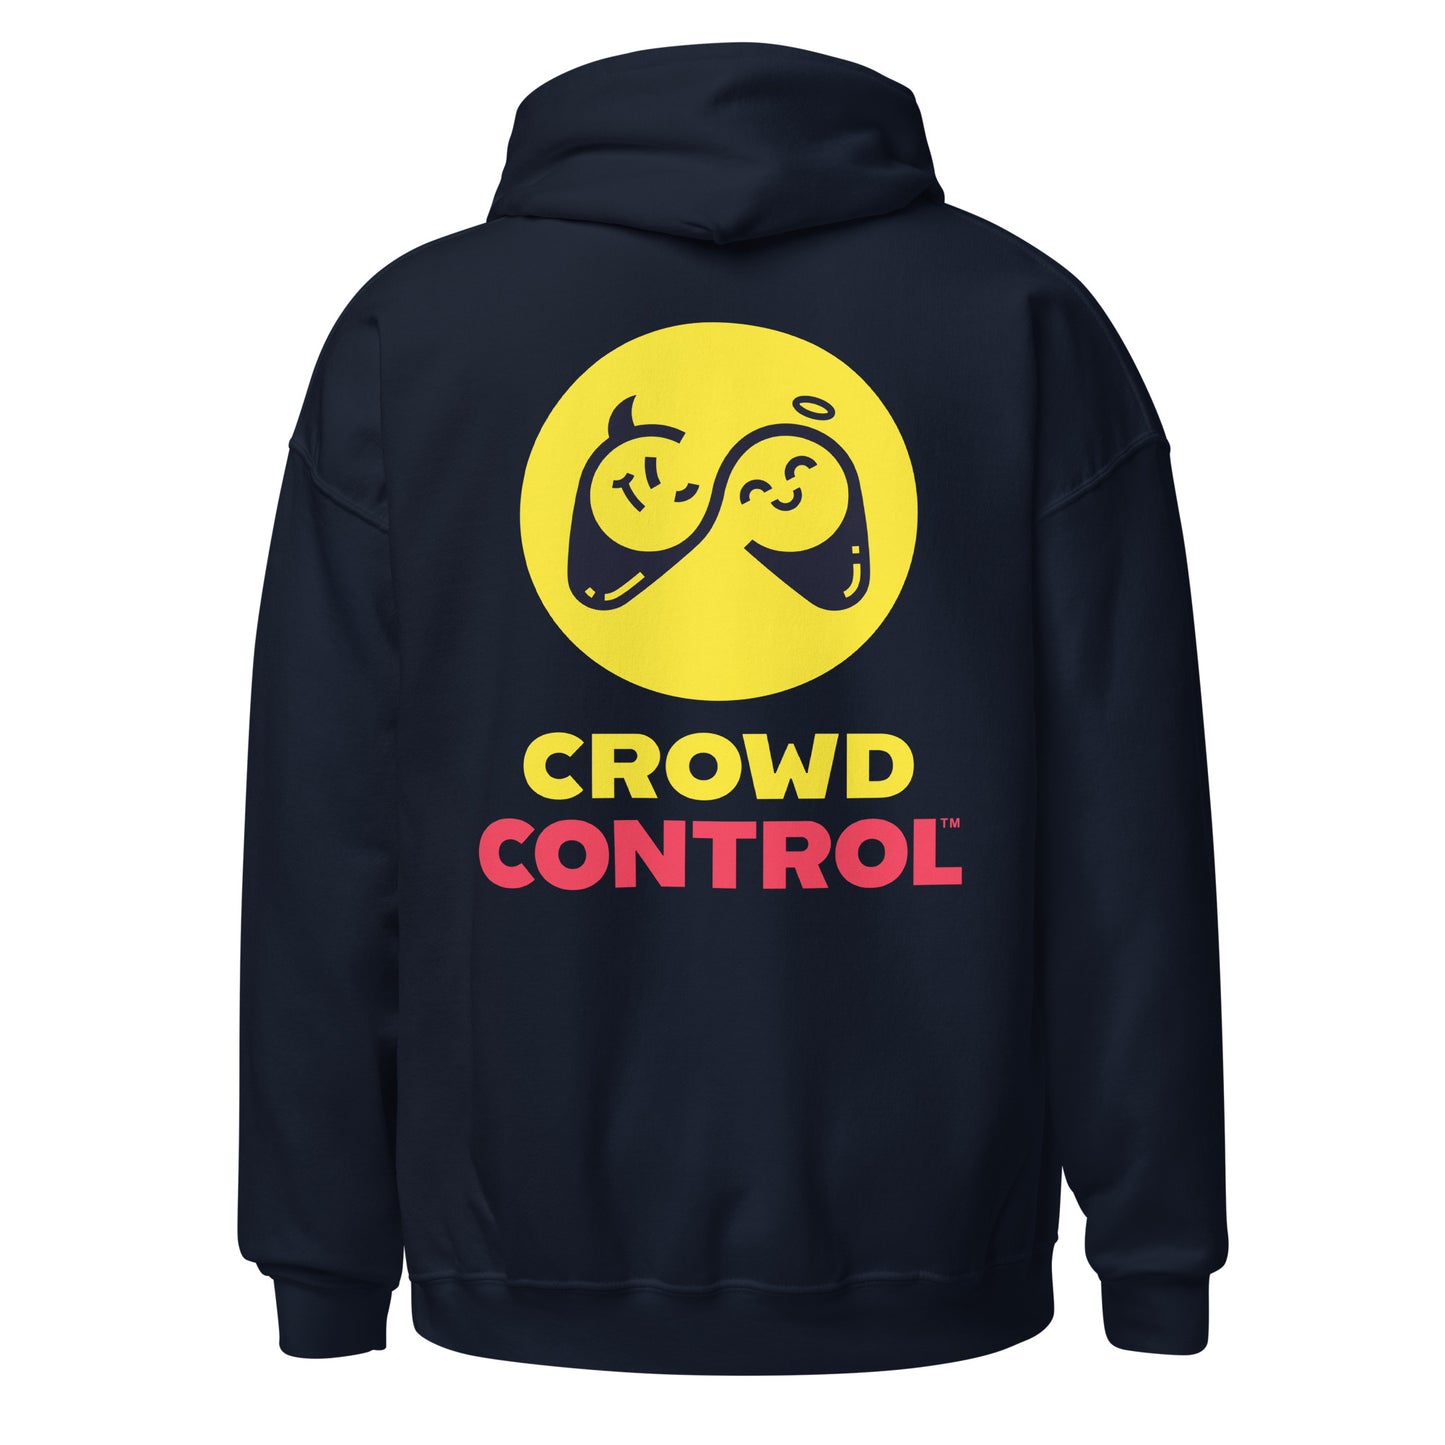 Crowd Control™ - Unisex Hoodie - Crowd Control Icon (Embroidered)